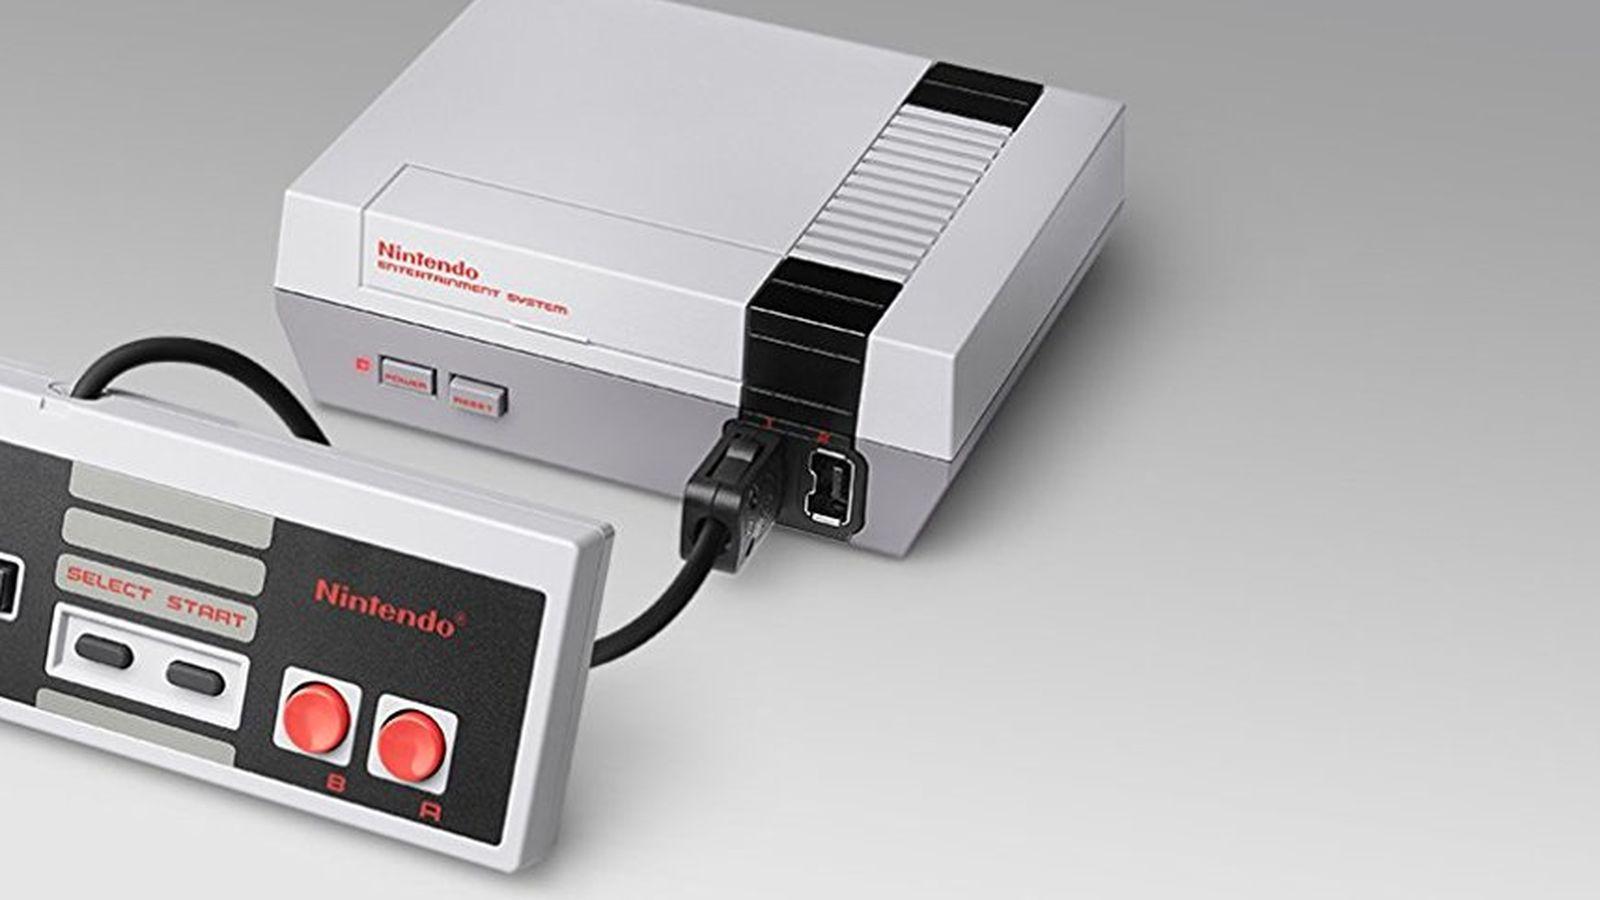 NES Classic Hacking: How to add more games to the mini Nintendo console